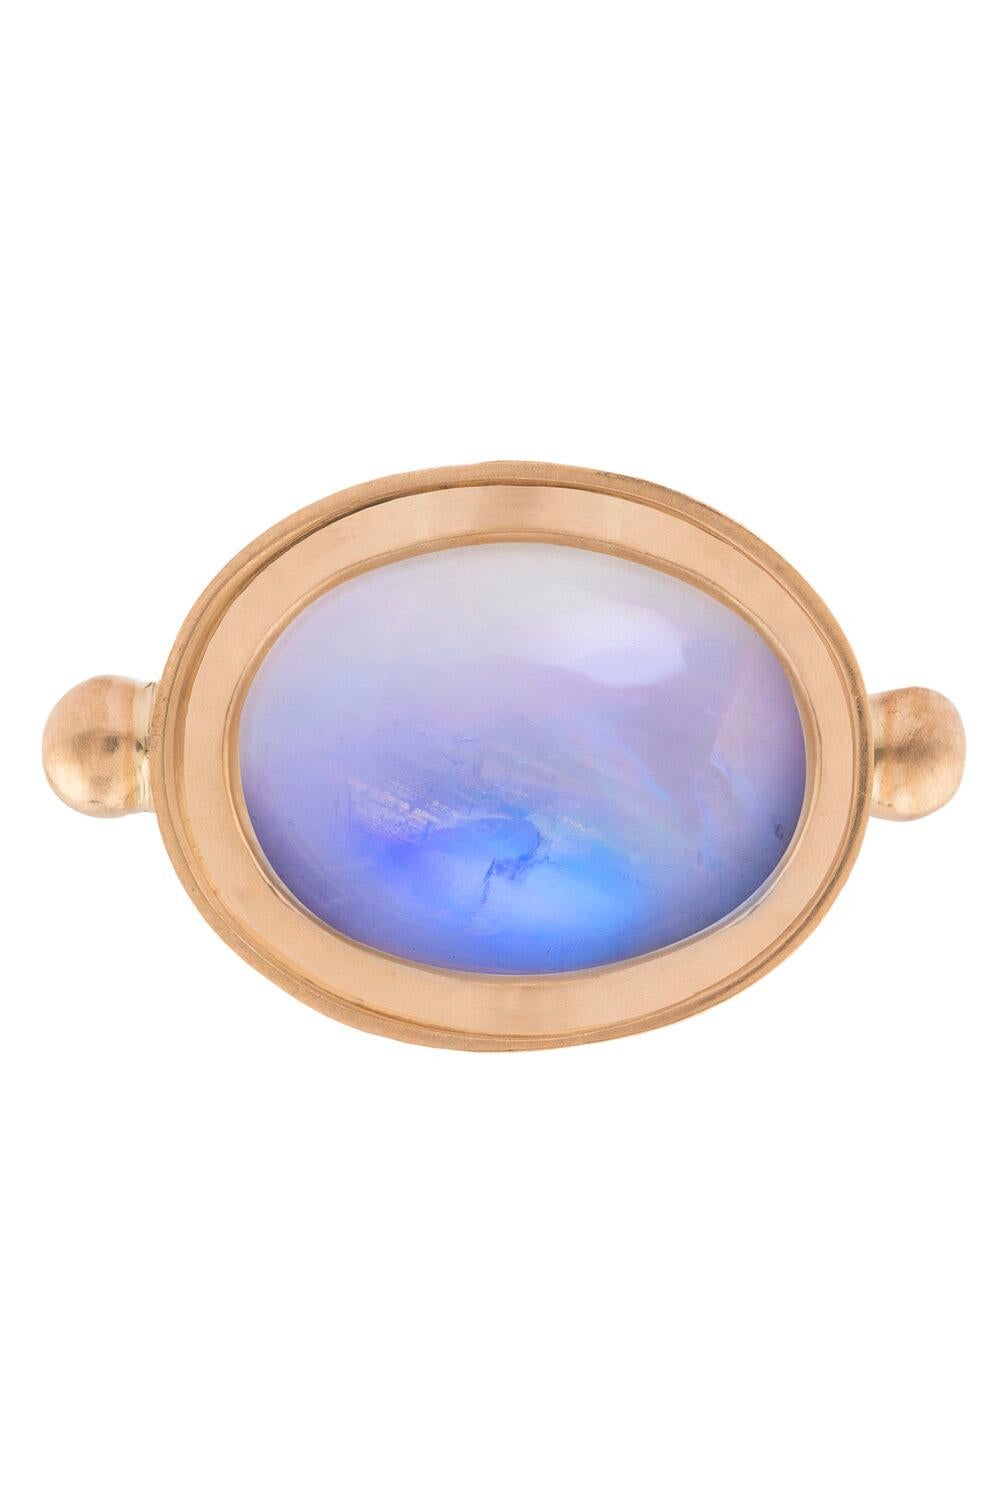 OUROBOROS horizontal oval with a square cabochon rainbow moonstone set in 18k gold ring.

This ring comes in various different sizes so please contact the designer.

OUROBOROS’ commitment to using only the most unique stones set in 18 or 24 Karat